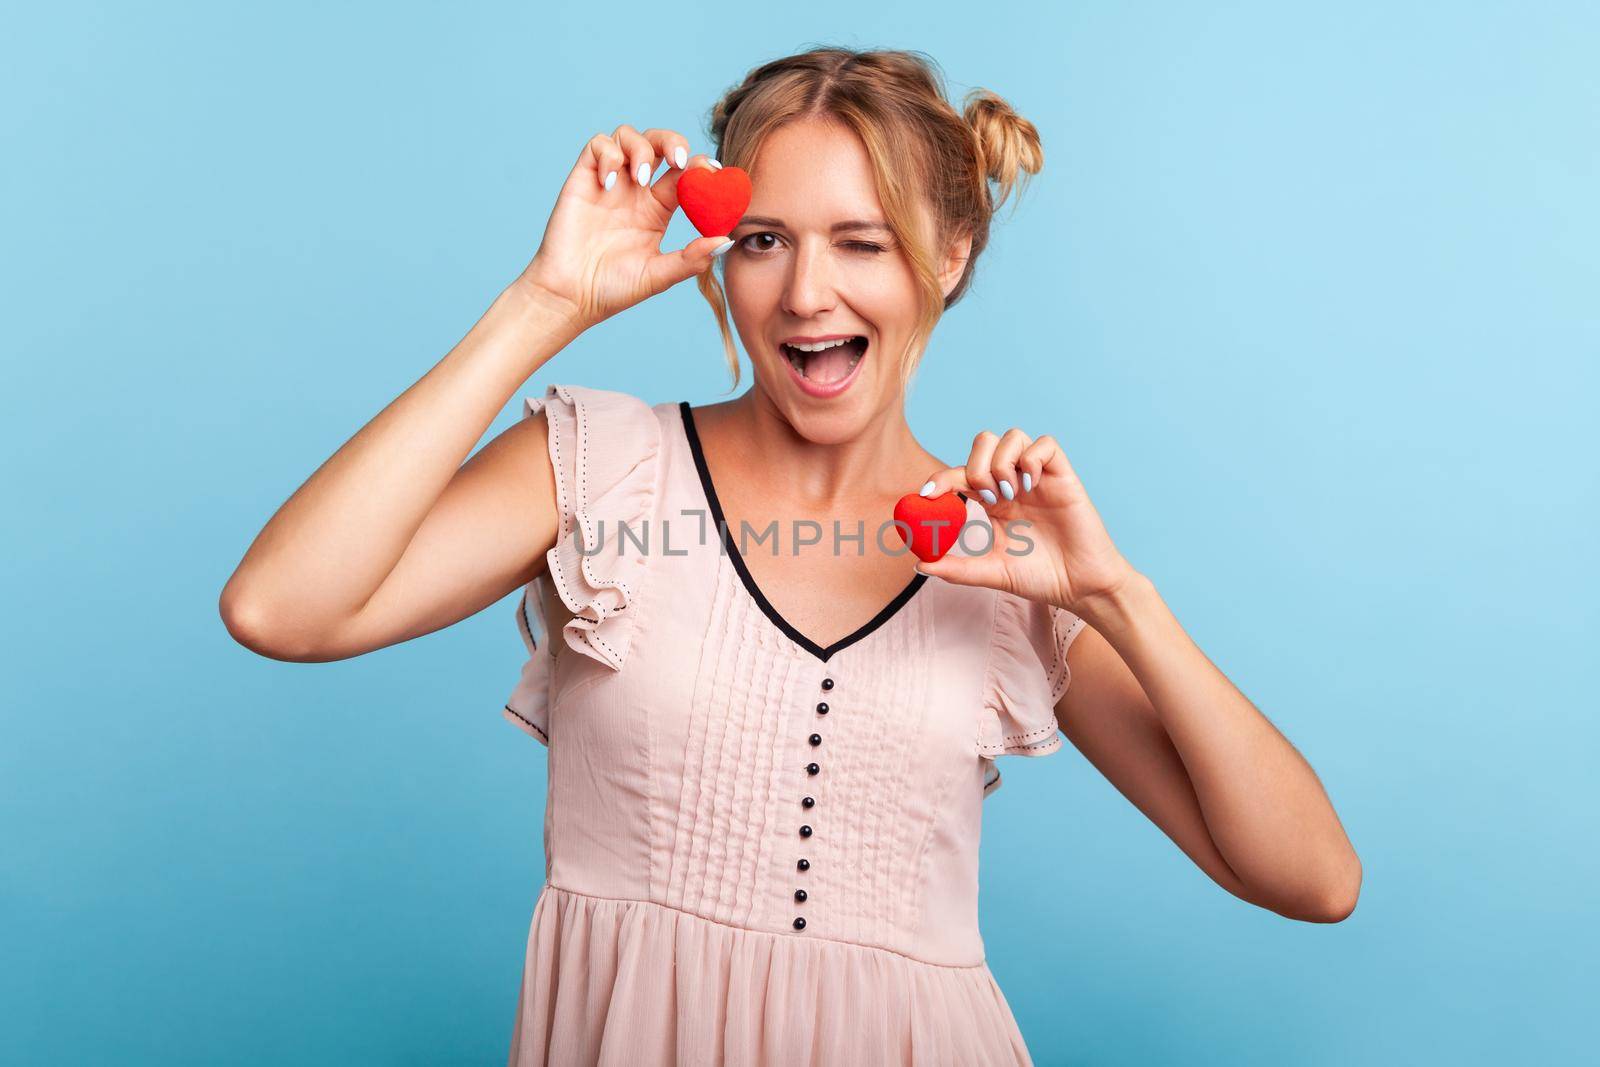 Portrait of friendly positive blonde woman in dress with two hair buns holding heart symbols in hands and winking at camera, sending love. Indoor studio shot isolated on blue background.